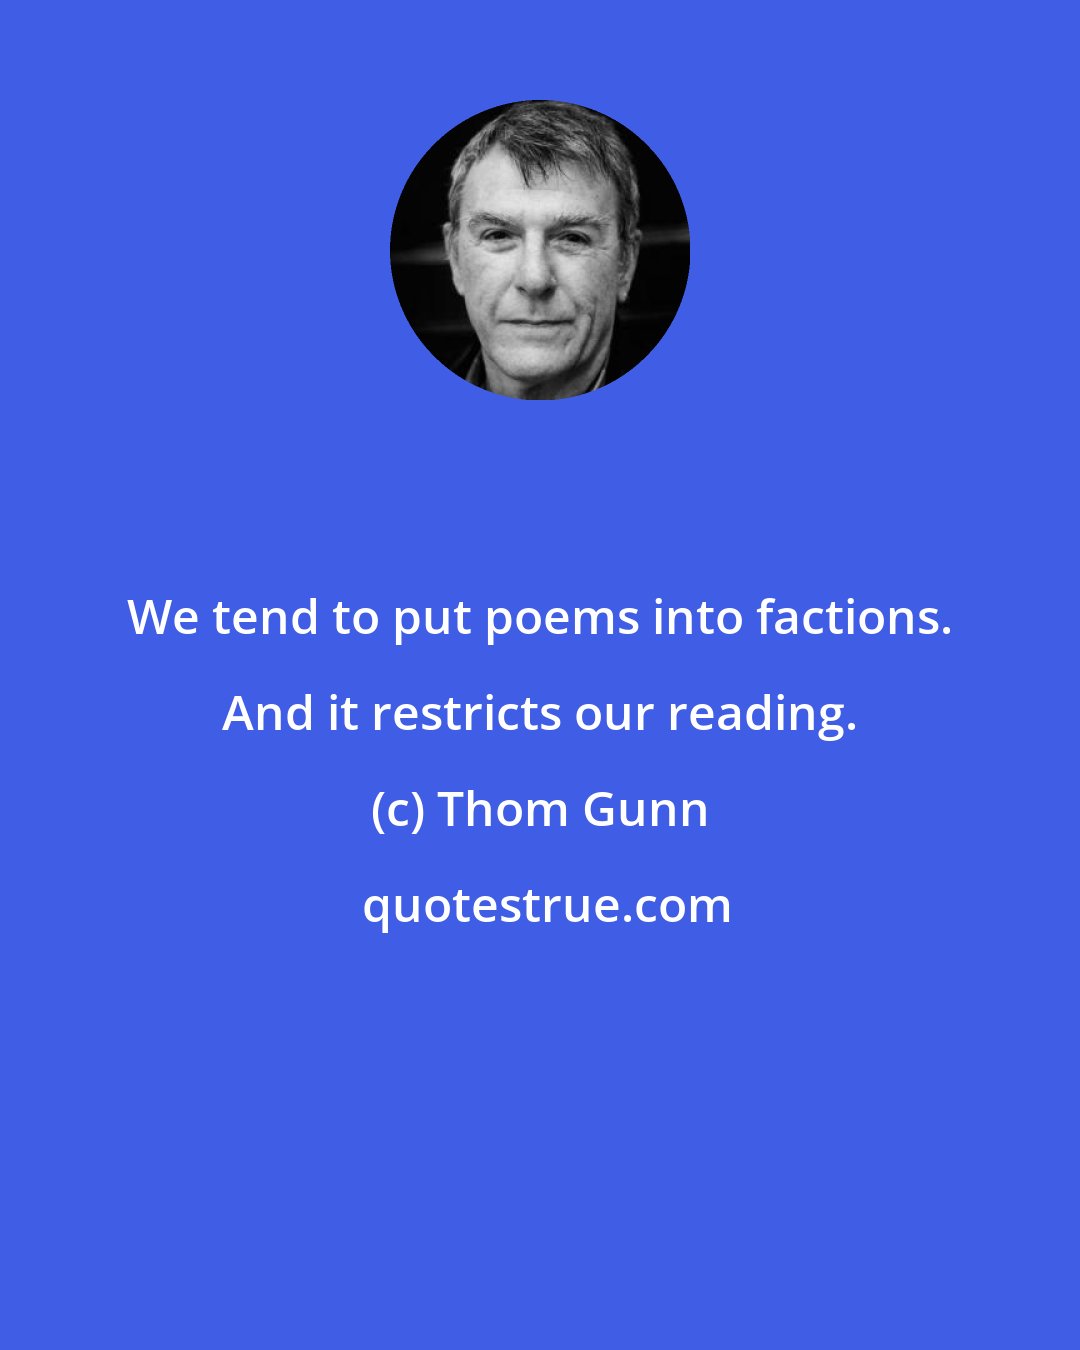 Thom Gunn: We tend to put poems into factions. And it restricts our reading.